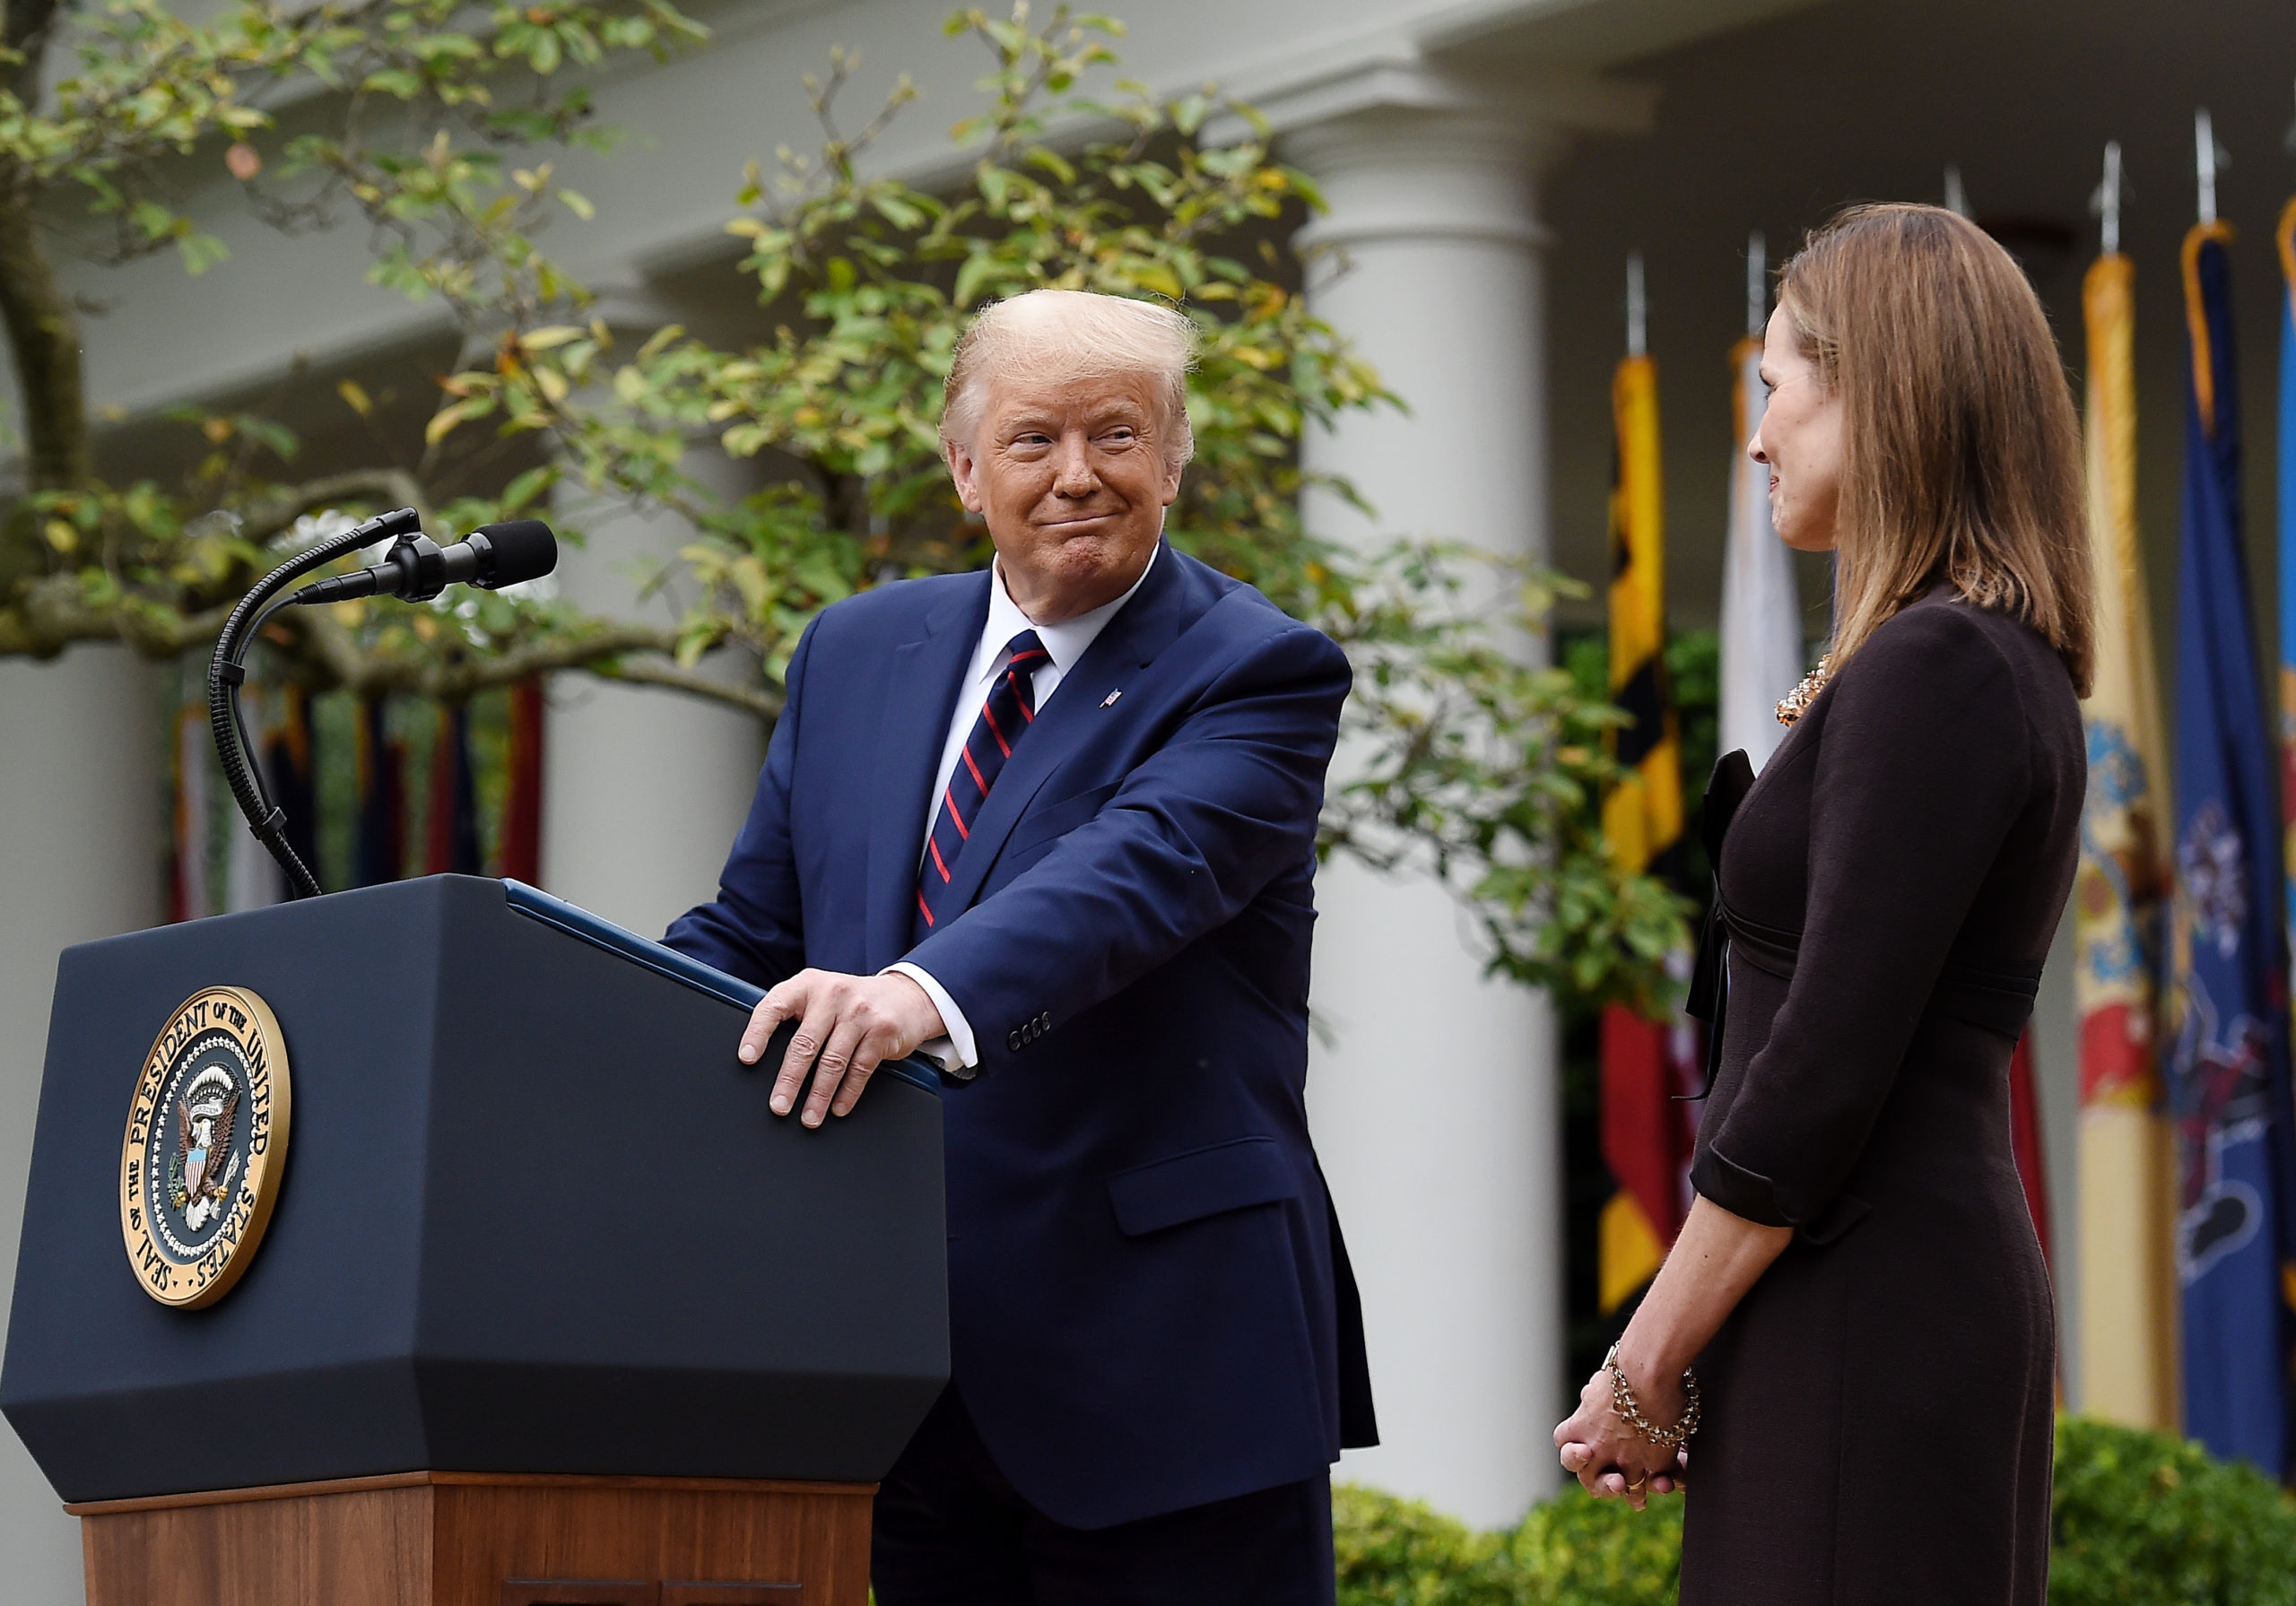 President Donald Trump nominates Judge Amy Coney Barrett for the Supreme Court on September 26, 2020. (Olivier Douliery/AFP via Getty Images)